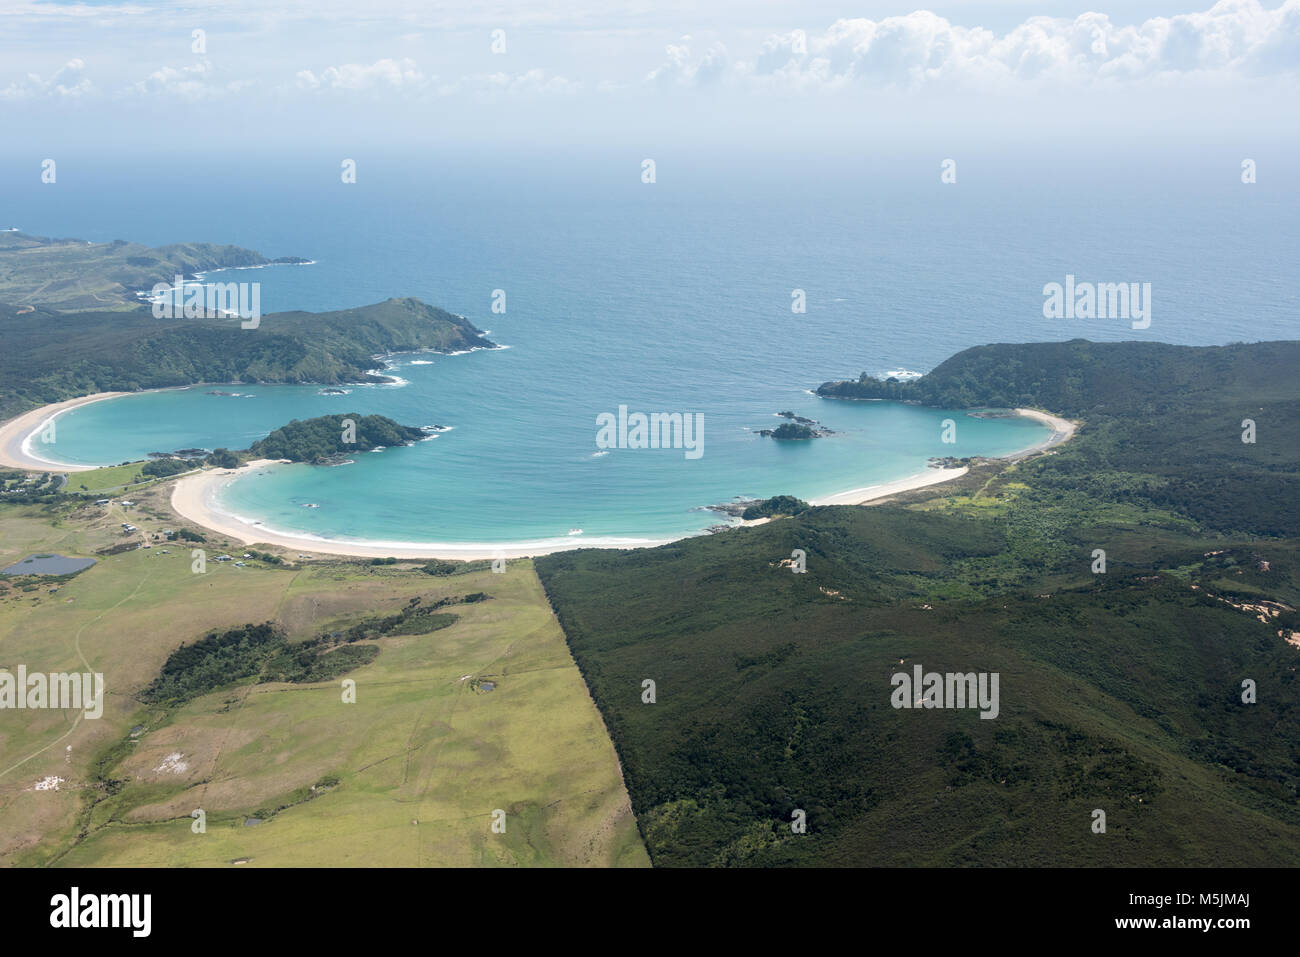 Aerial View of Bay of Islands, North Island, New Zealand Stock Photo